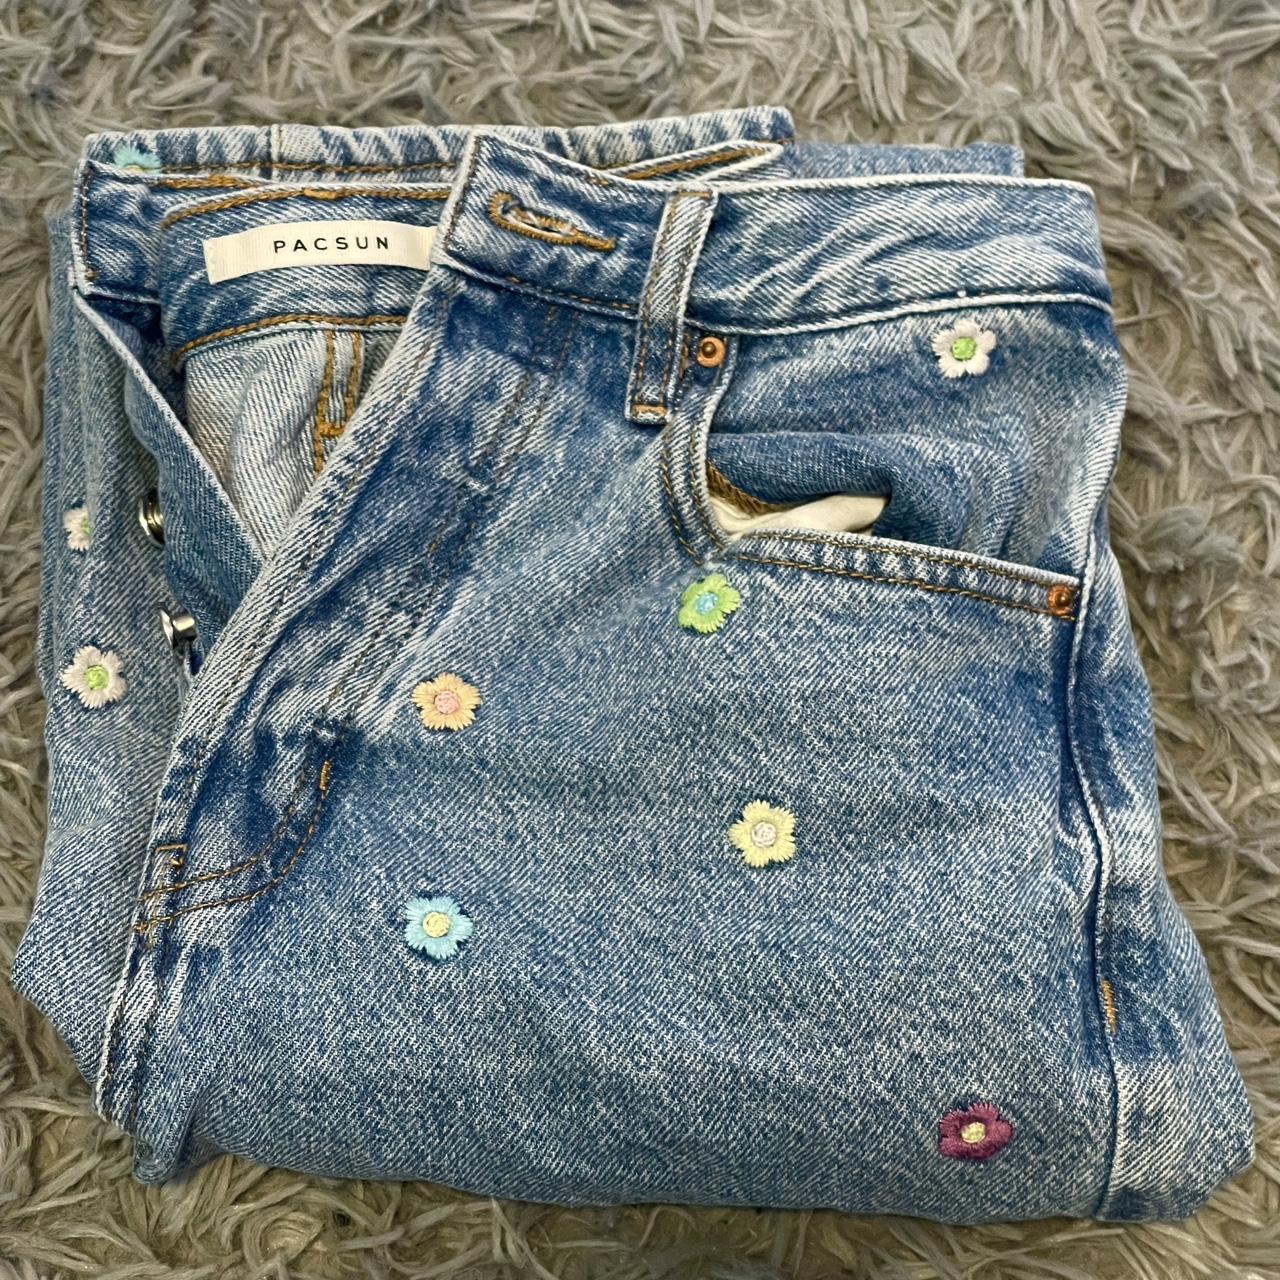 PACSUN EMBROIDERED FLOWER JEANS Size 27. I wear a... - Depop